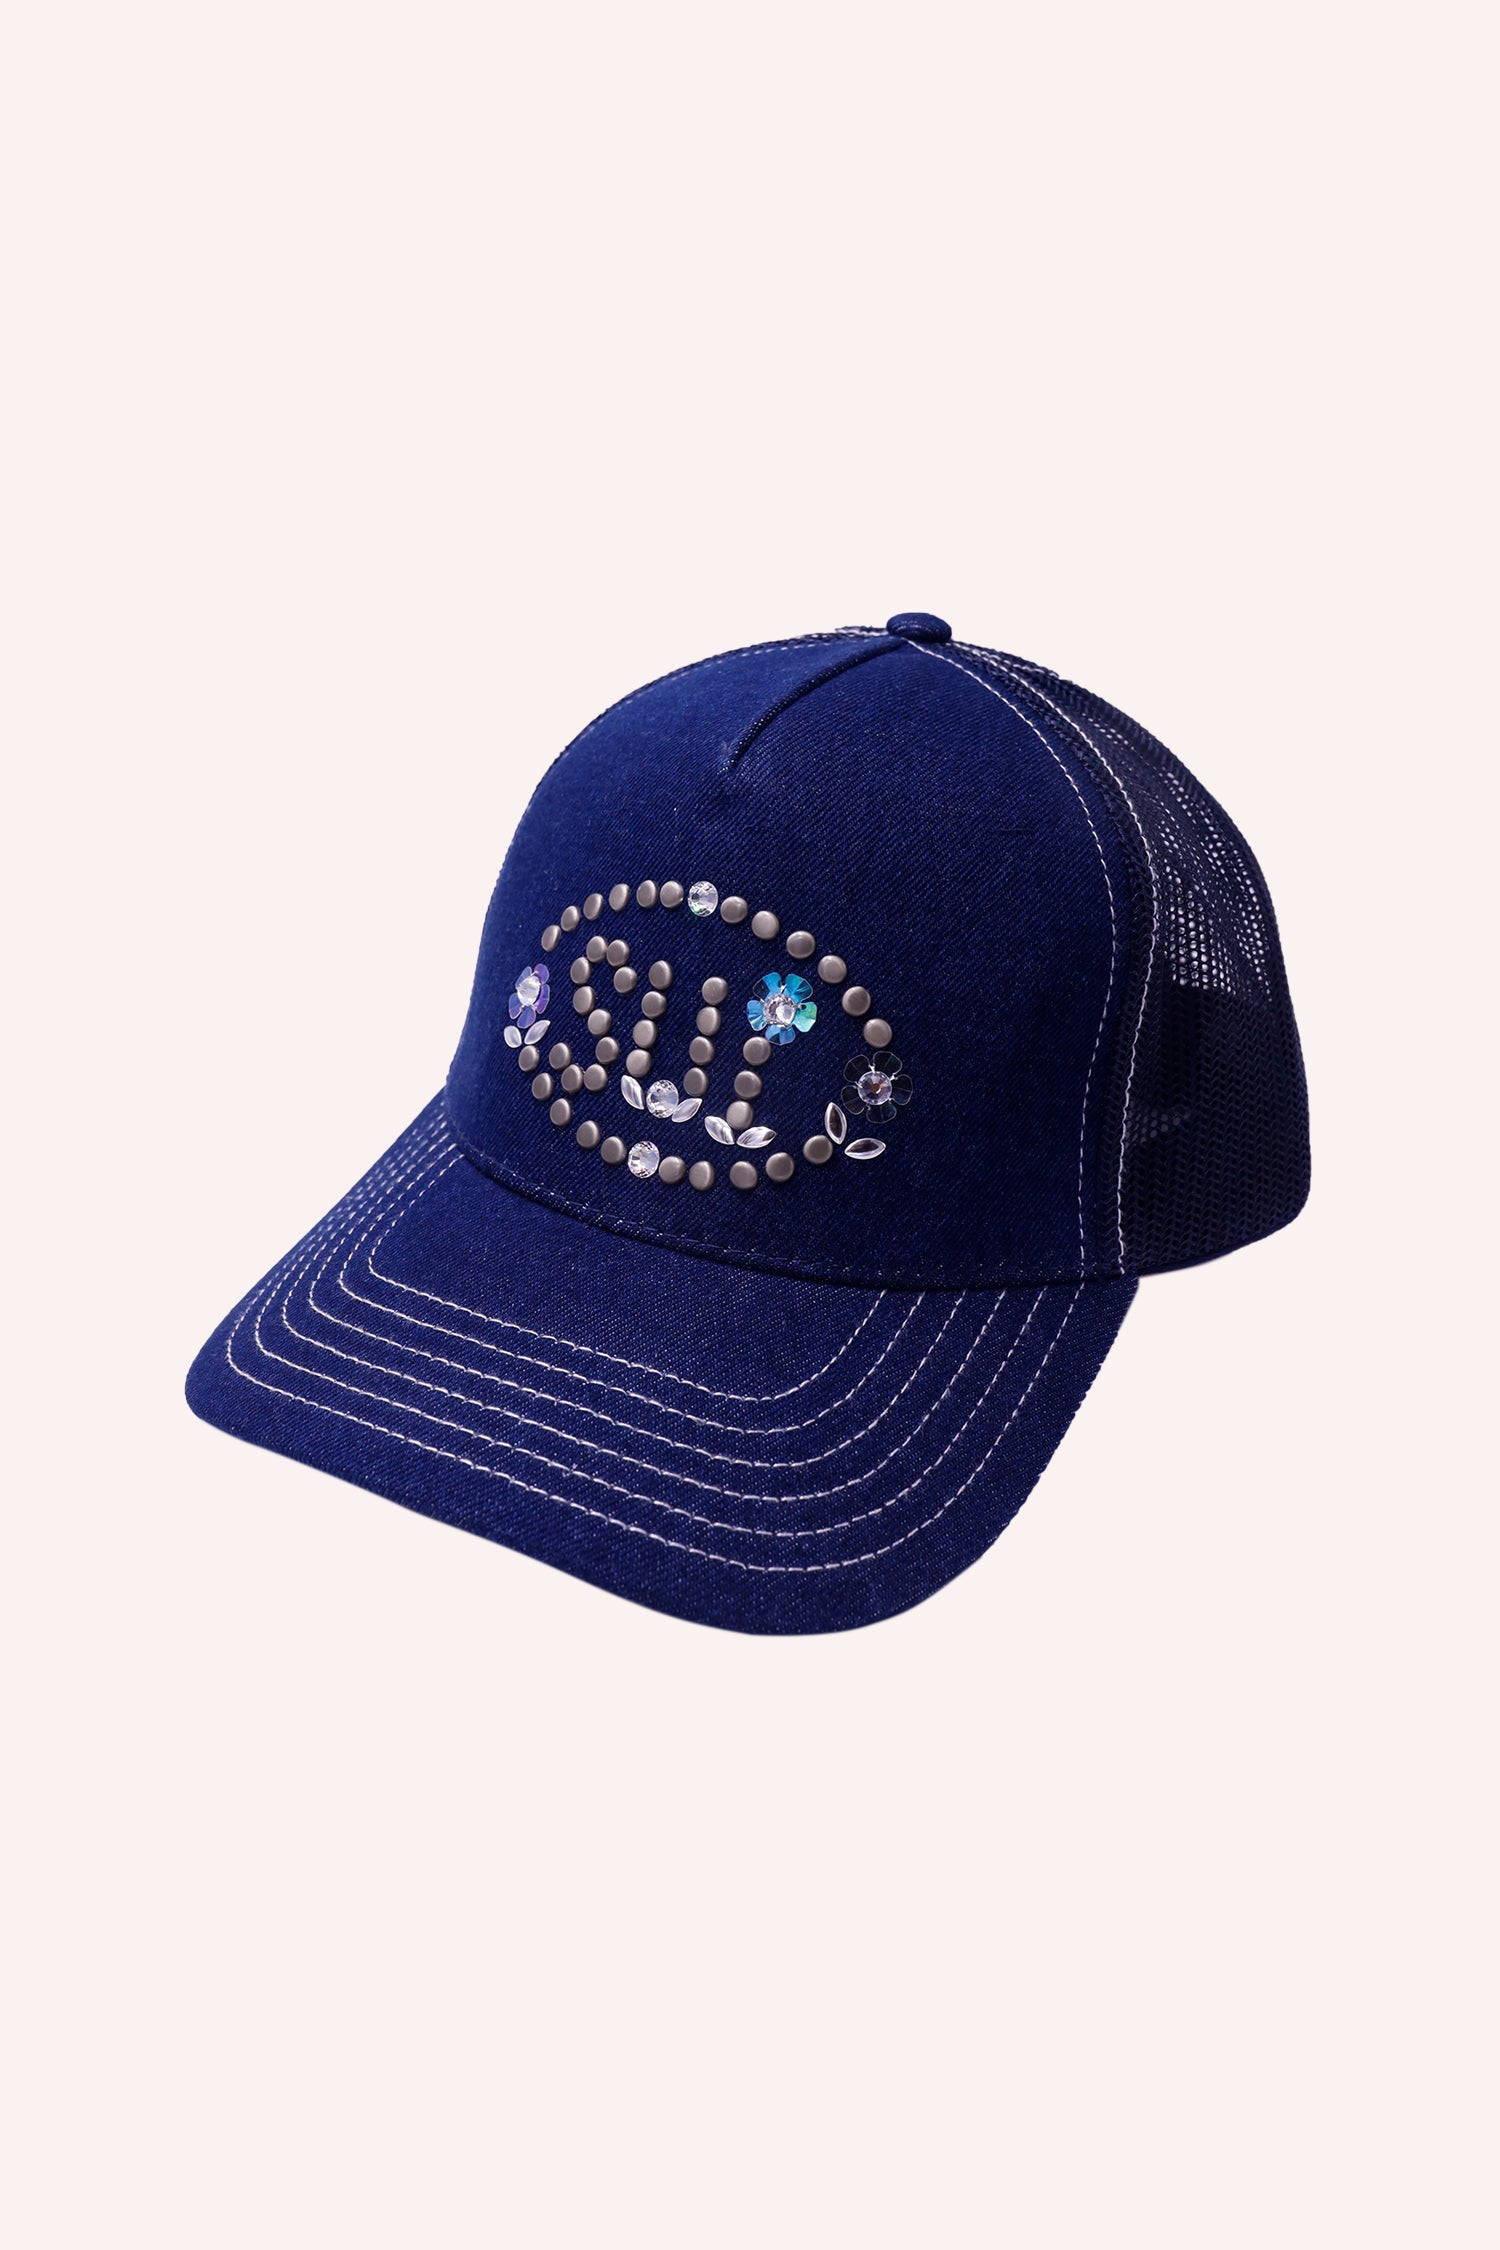 Dark denim baseball hat with white stitches and studded Anna Sui logo inside an oval with a floral design